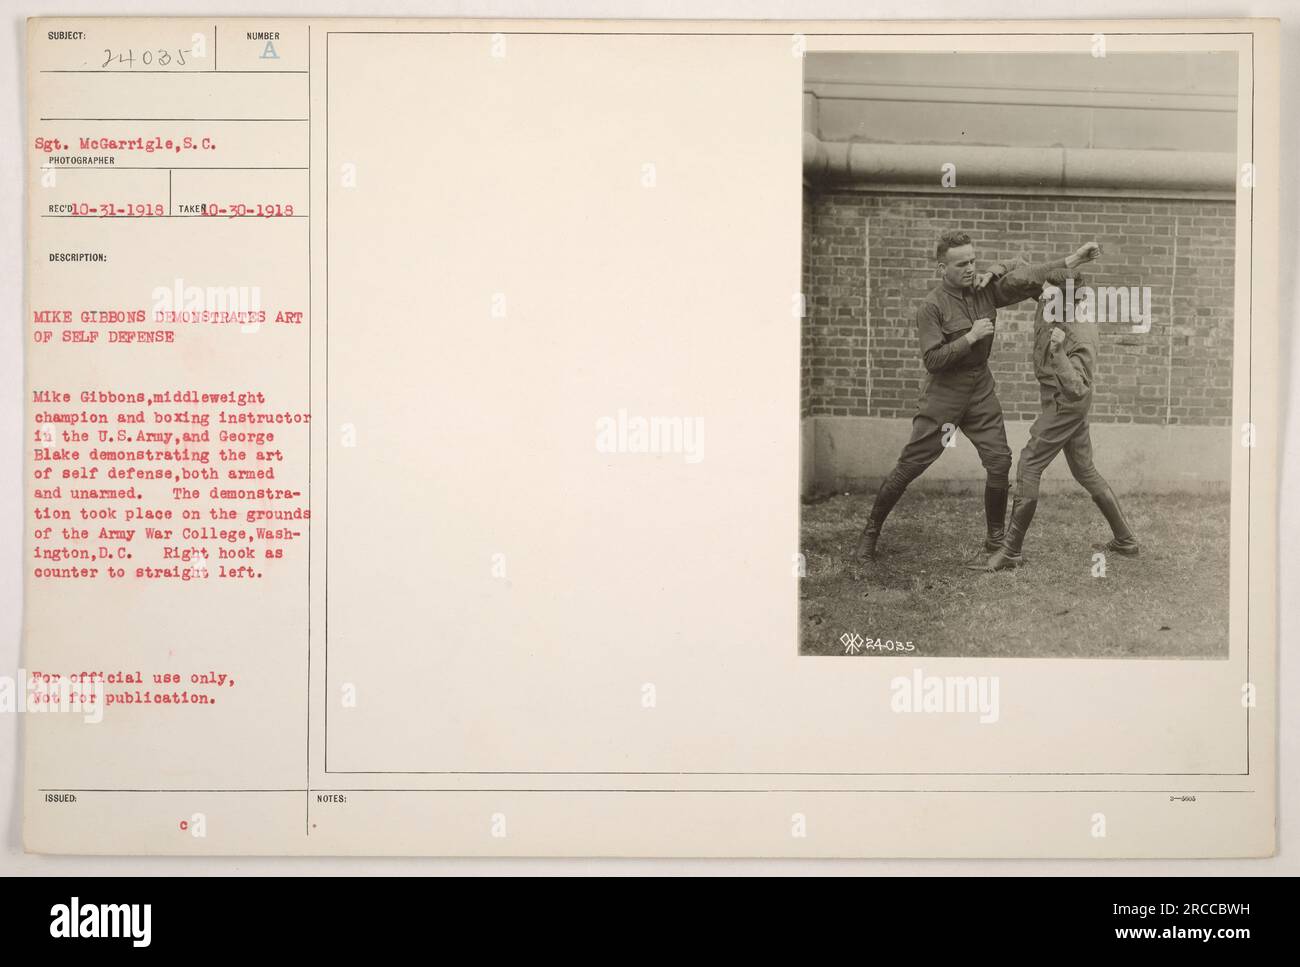 Sgt. MeGarrigle captures a photo of Mike Gibbons, U.S. Army's middleweight champion and boxing instructor, demonstrating the art of self-defense alongside George Blake at the Army War College in Washington D.C. The photo, taken on October 31, 1918, shows Gibbons employing a right hook as a counter to a straight left. This image is for official use only and should not be published. Stock Photo